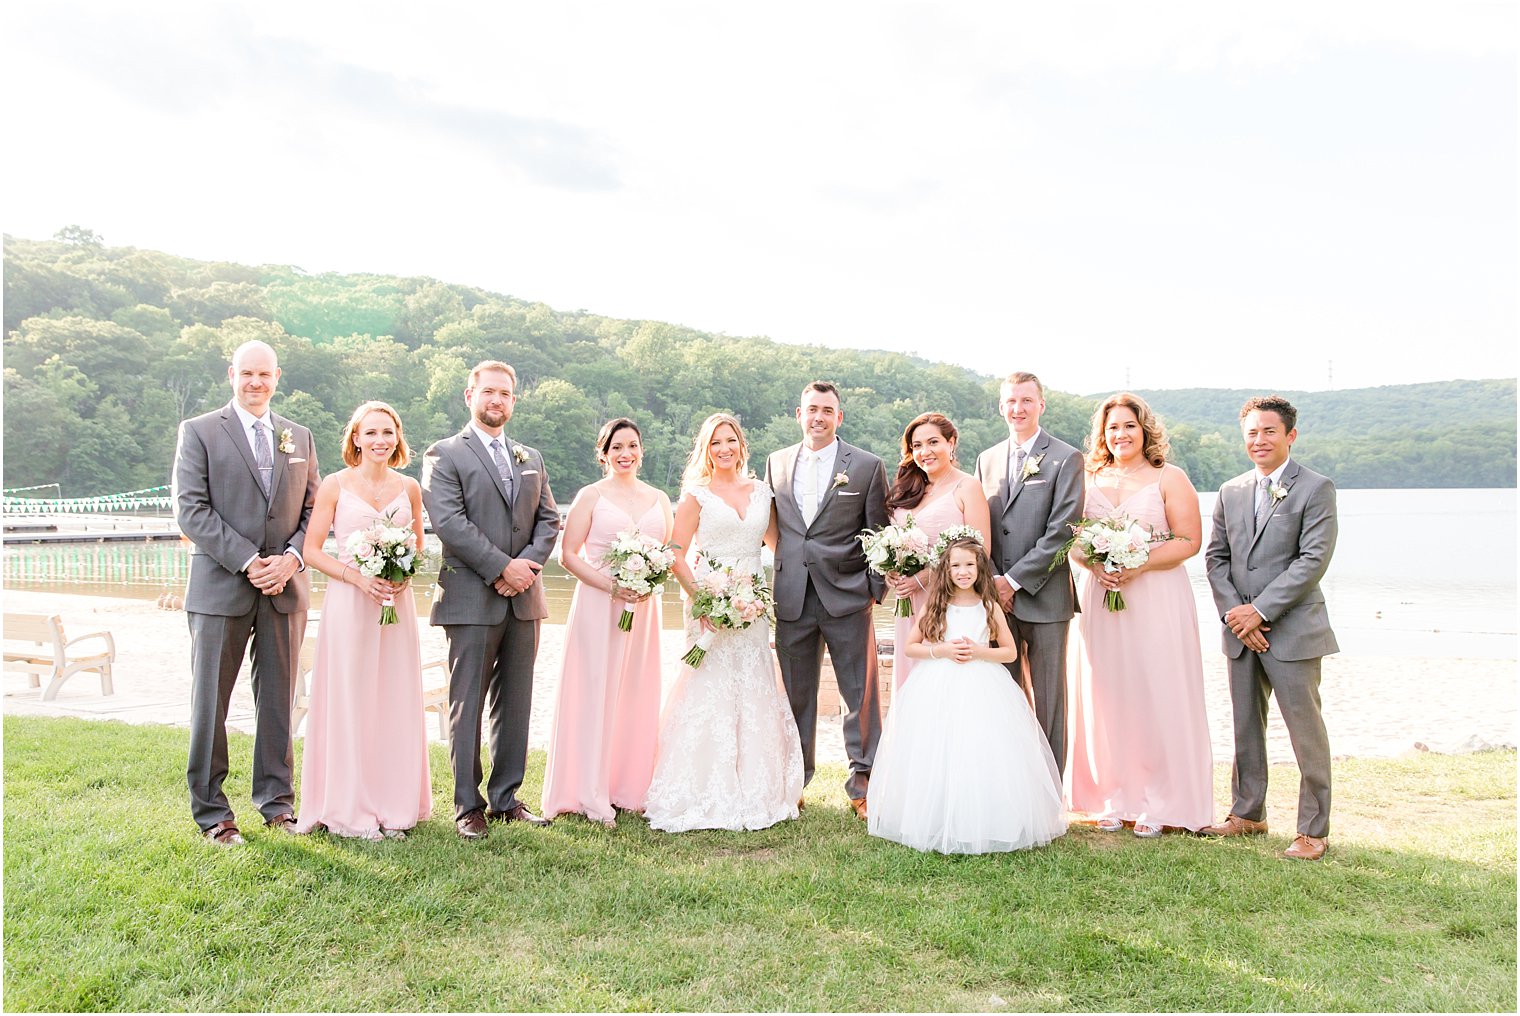 Bridal party in gray and pink